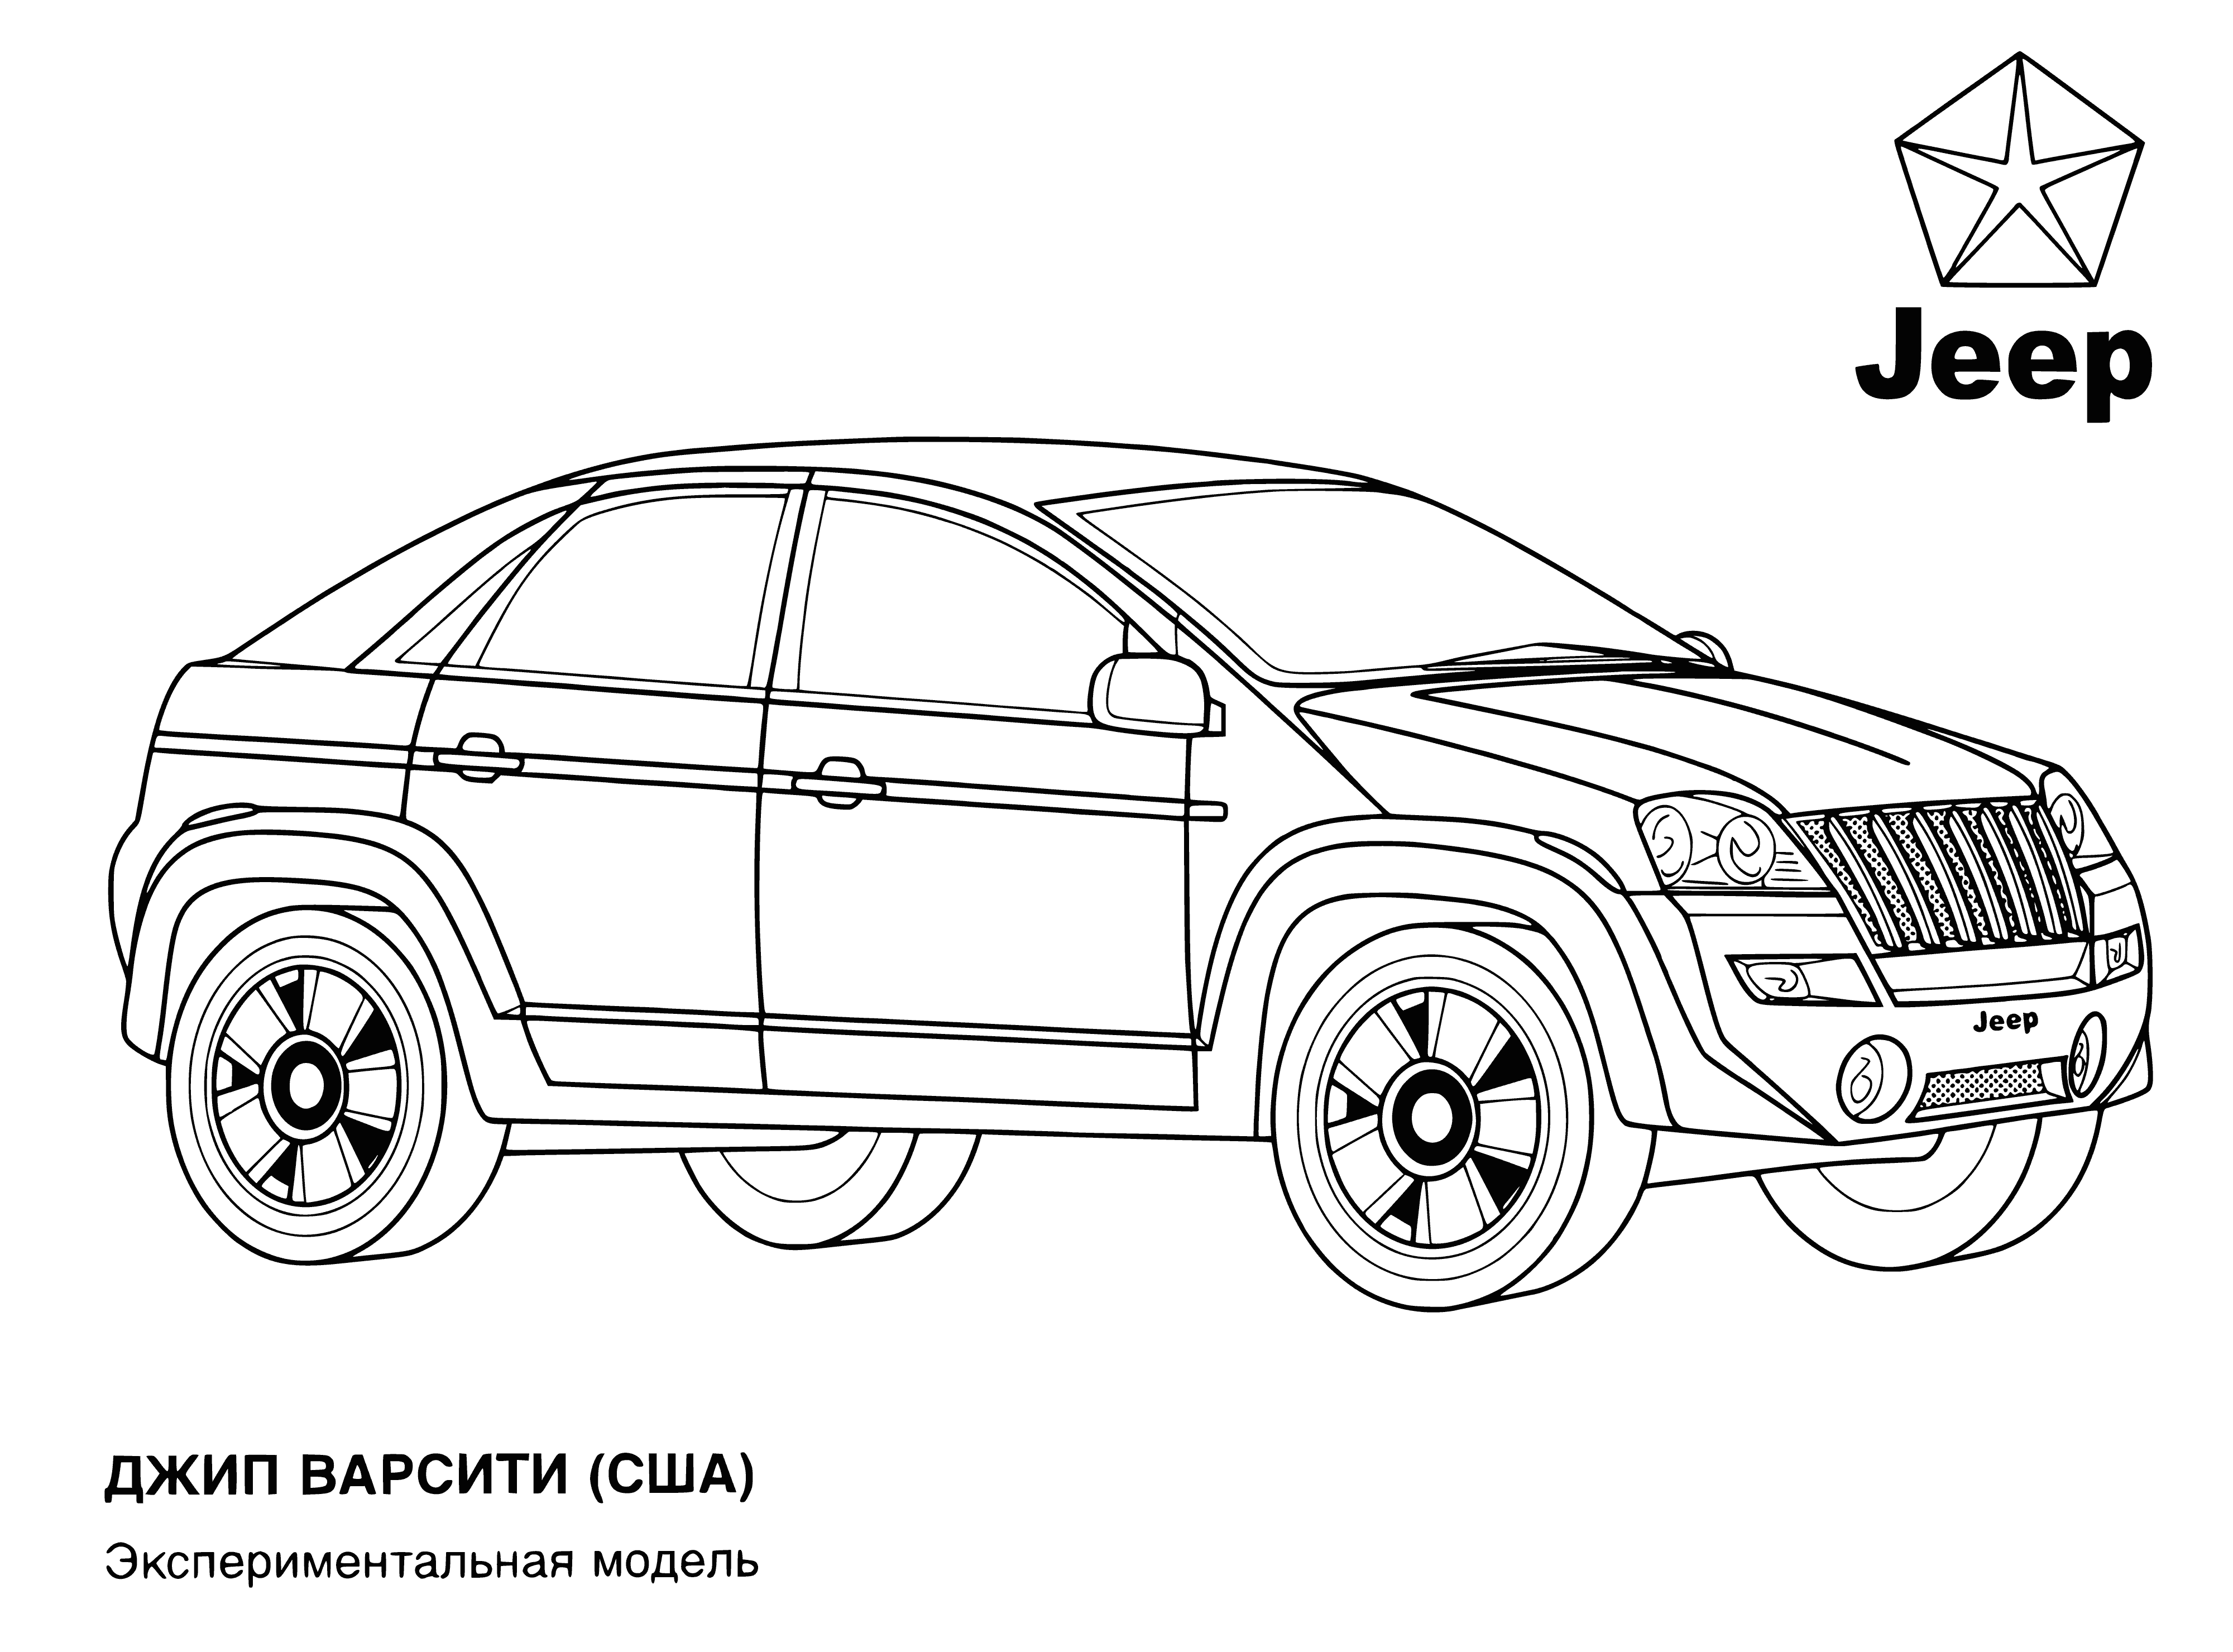 coloring page: New Jeep Varsity 4-door car seats up to 5 w/ black exterior/interior, sunroof, 4WD, 3.6-liter V6 engine - just released in USA.